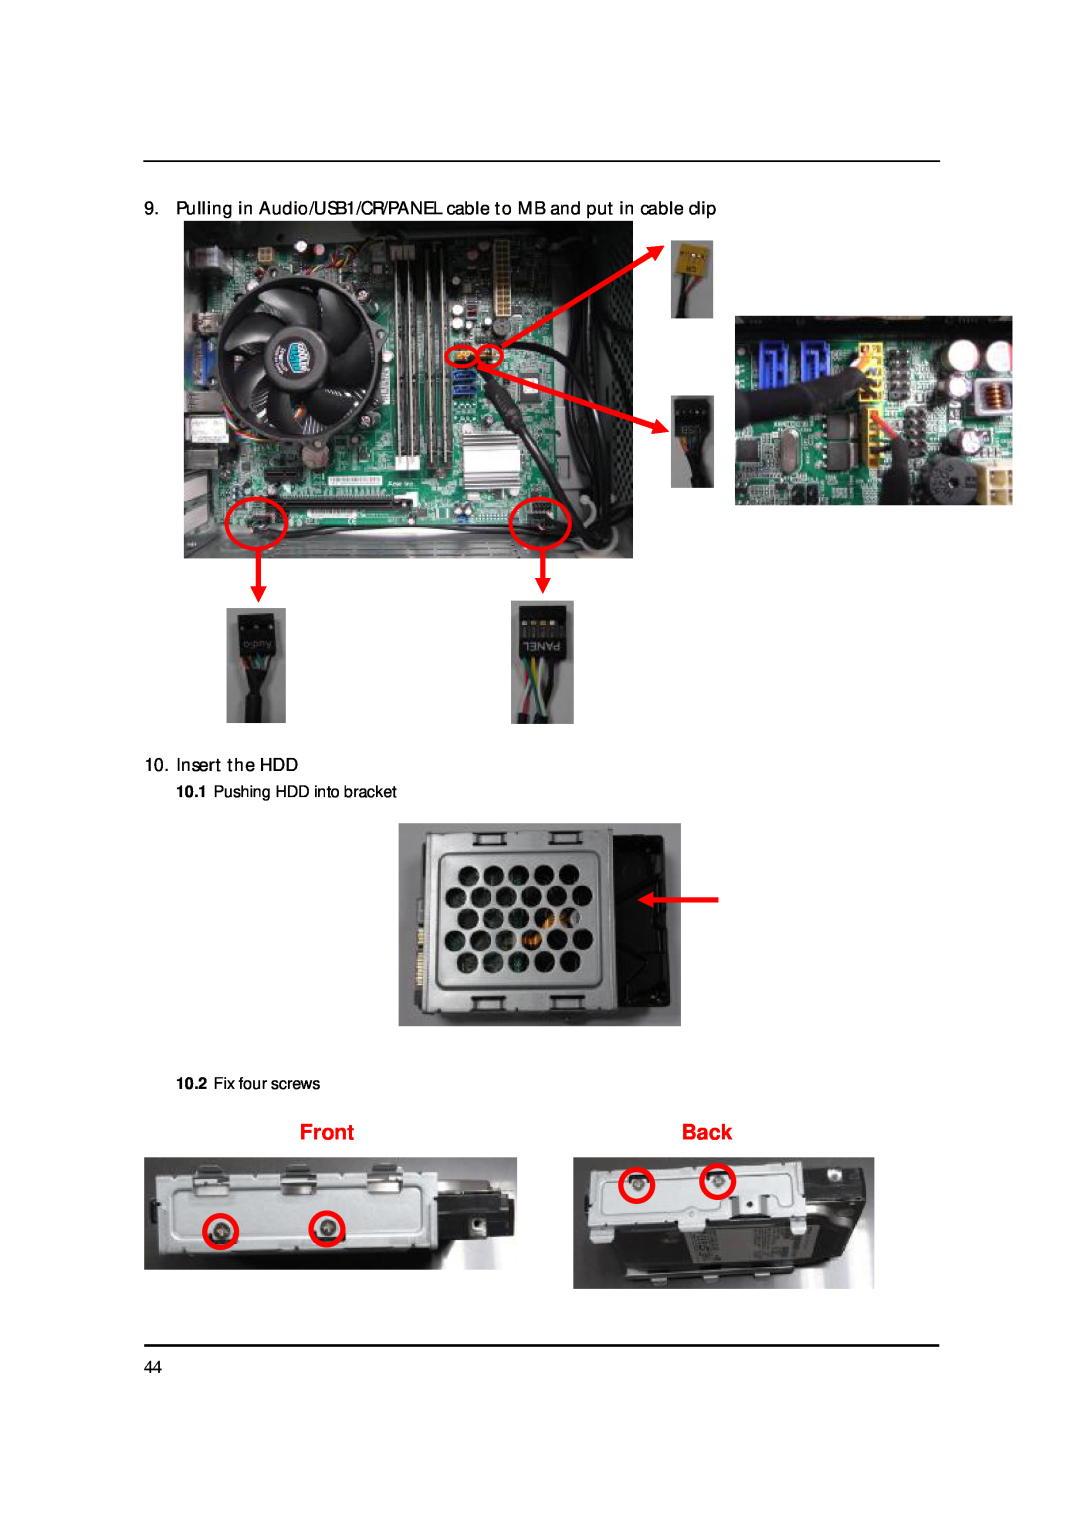 Acer S3811 manual Front, Back, Pulling in Audio/USB1/CR/PANEL cable to MB and put in cable clip, Insert the HDD 